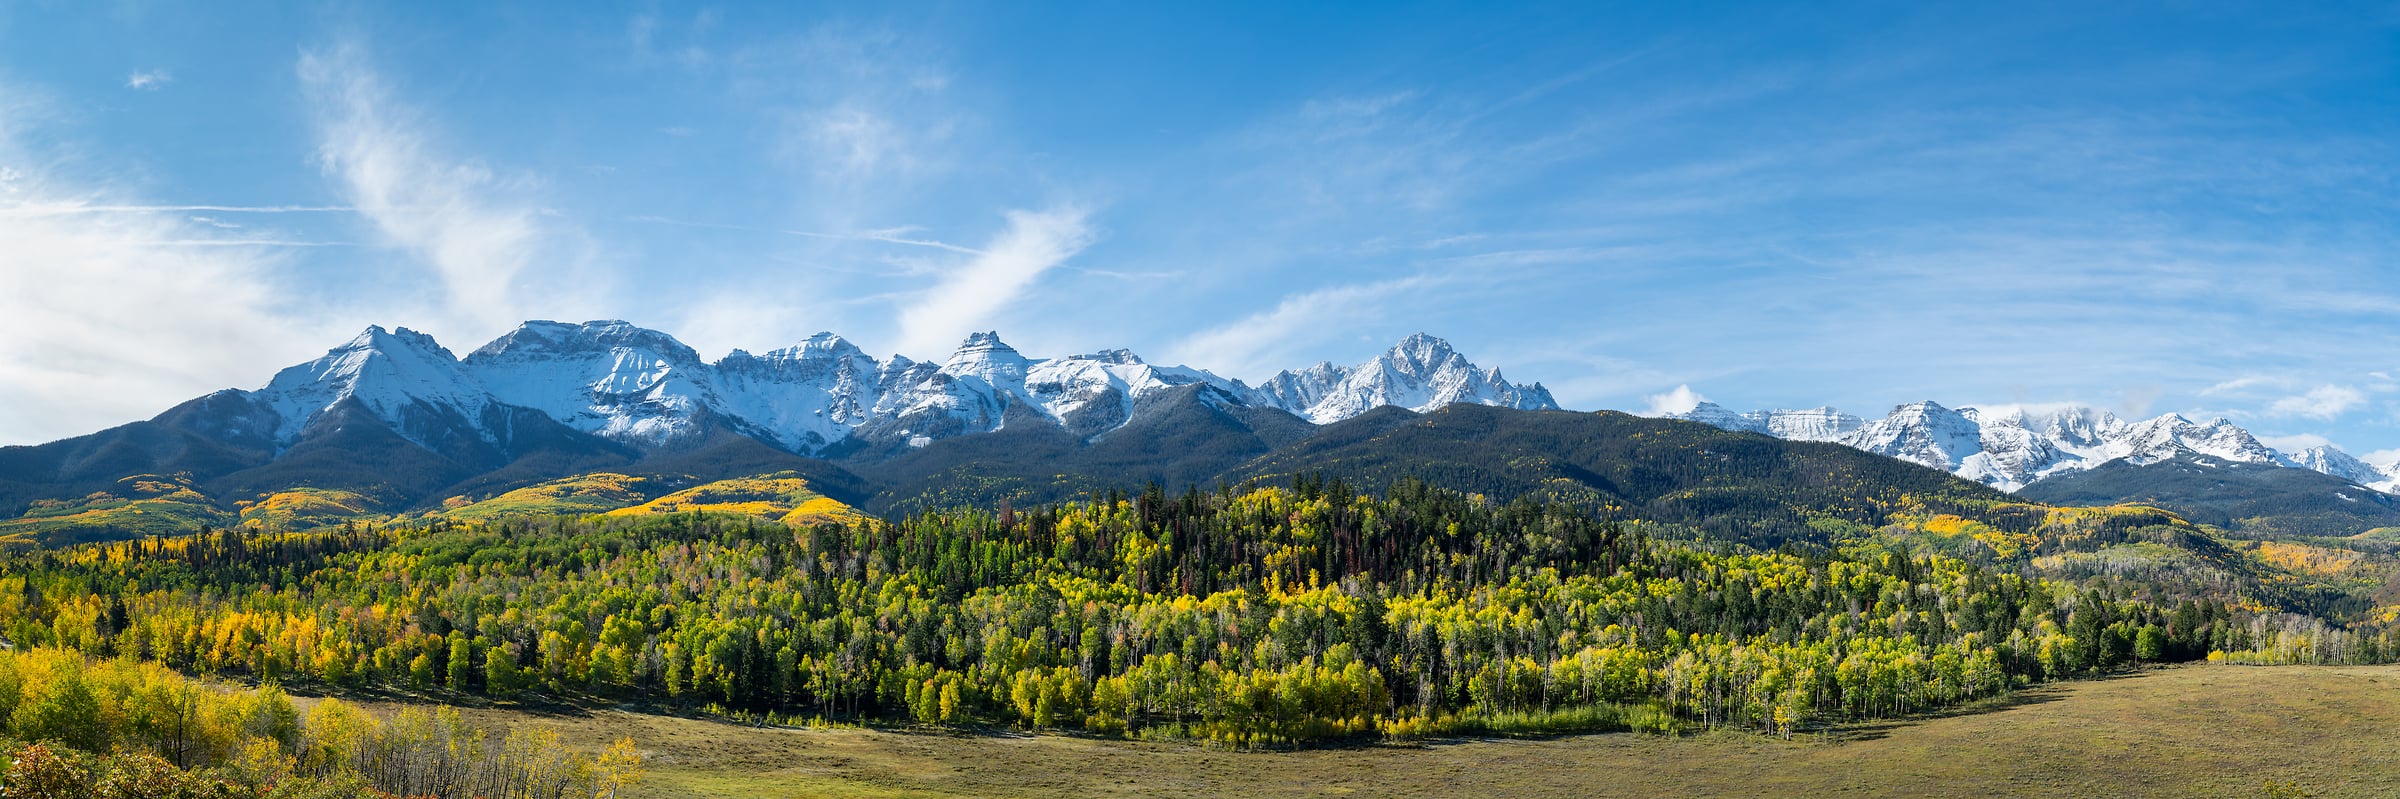 384 megapixels! A very high resolution, large-format VAST photo print of The Sneffels Range of mounatins with autumn trees in the foreground; landscape photograph created by Greg Probst in Uncompahgre National Forest, Colorado.